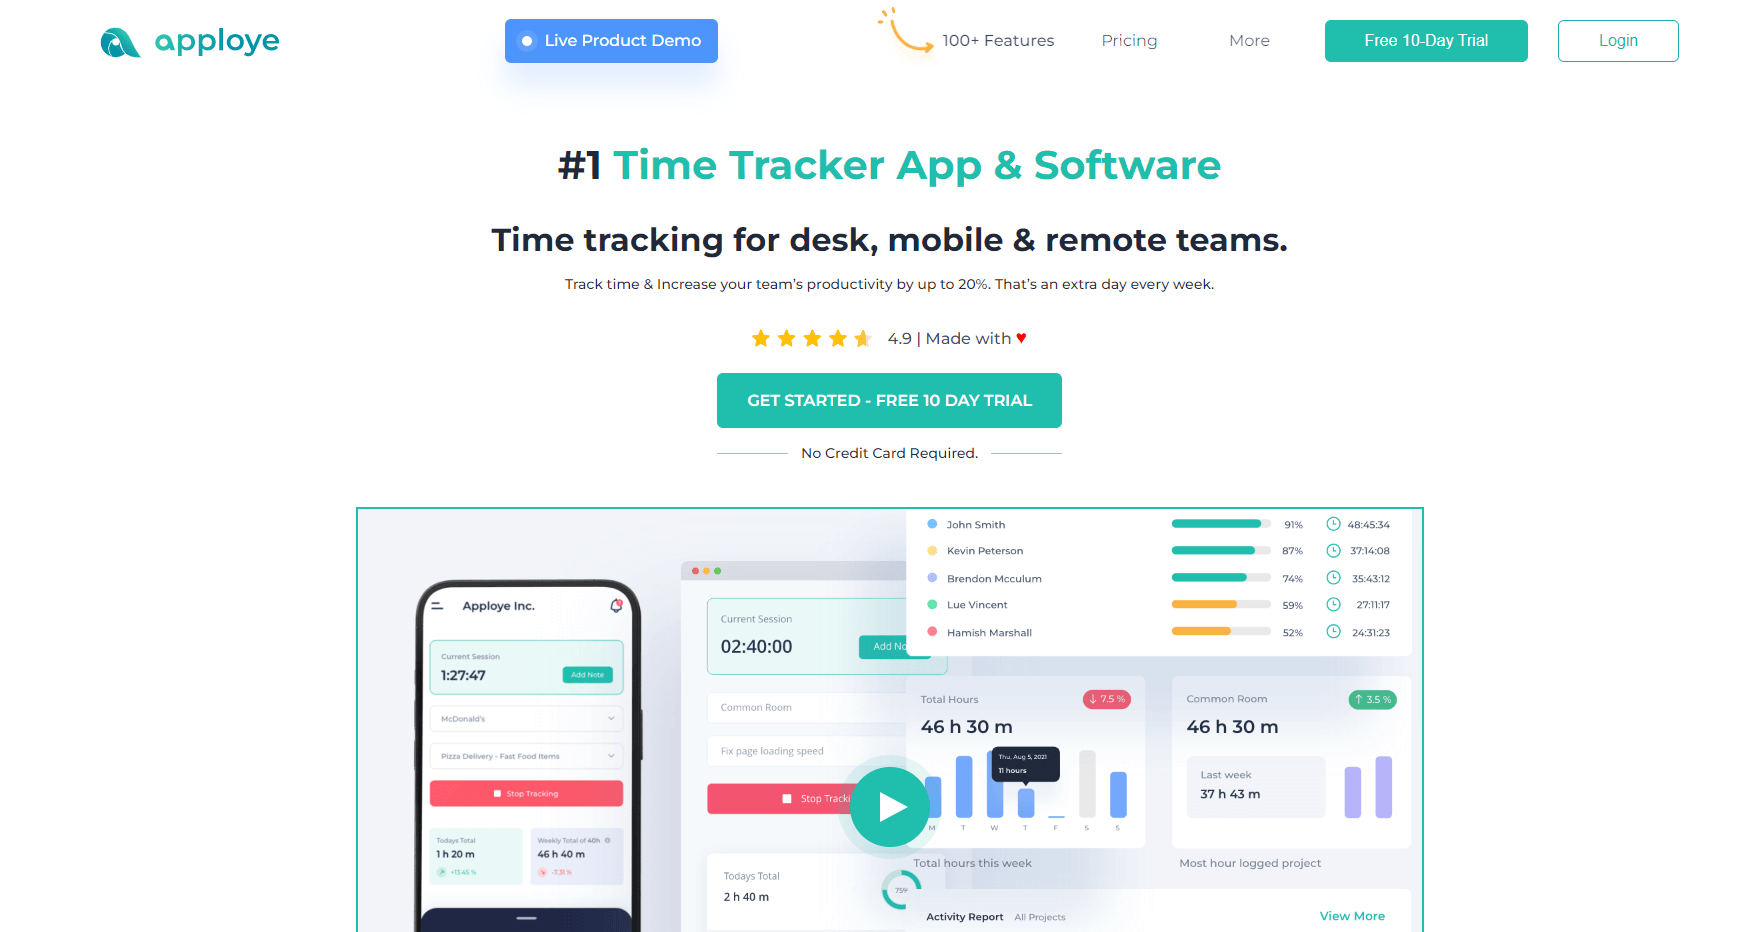 Homepage of Apploye, showing video thumbnail of top ranked employees and desktop time tracker apps, with title Time Tracker App & Software